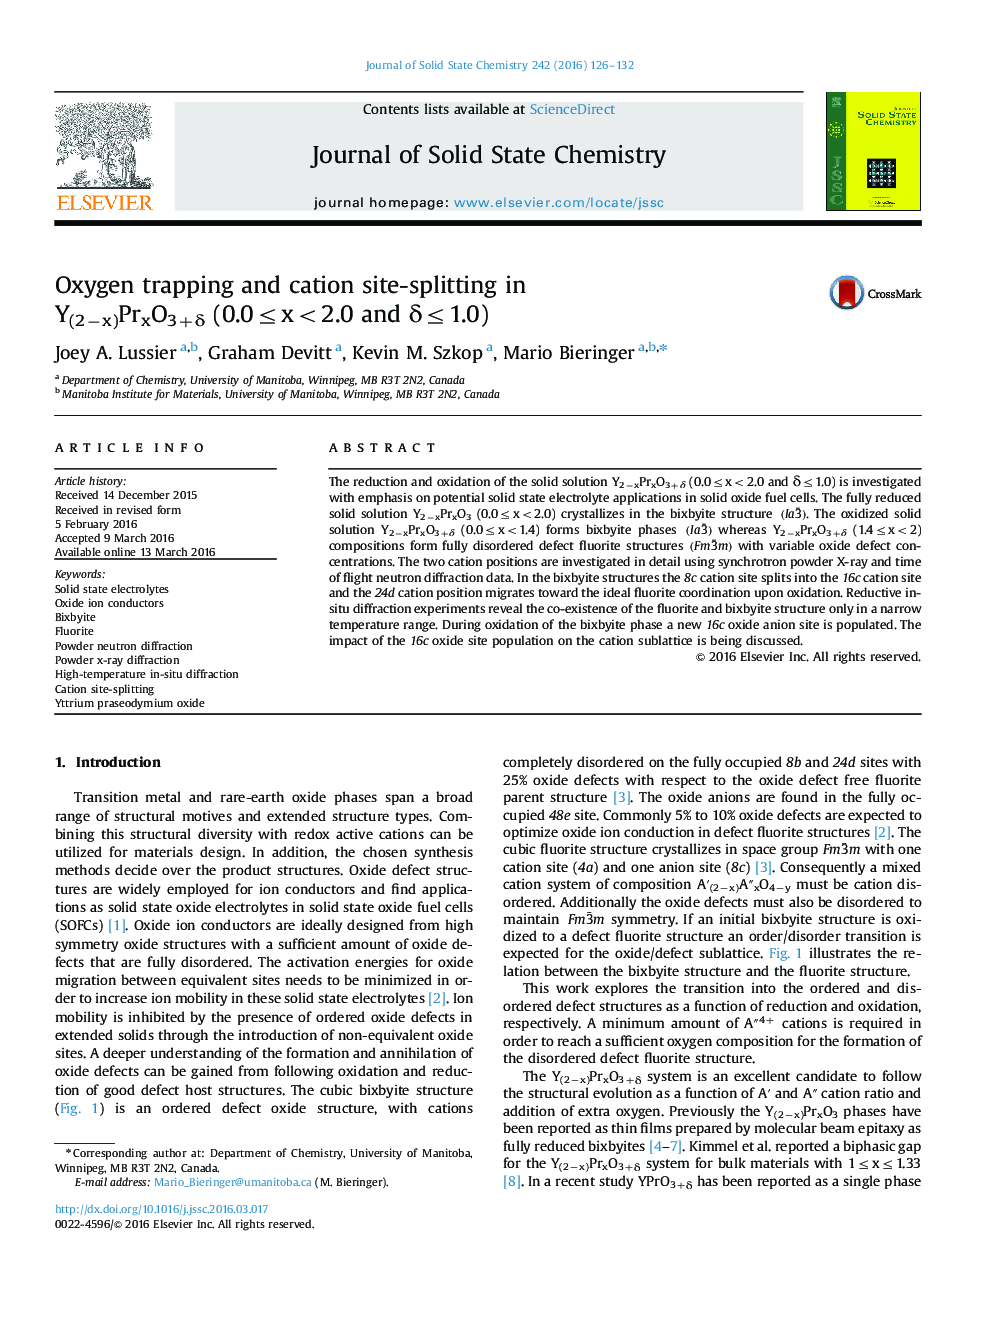 Oxygen trapping and cation site-splitting in Y(2âx)PrxO3+Î´ (0.0â¤x<2.0 and Î´â¤1.0)